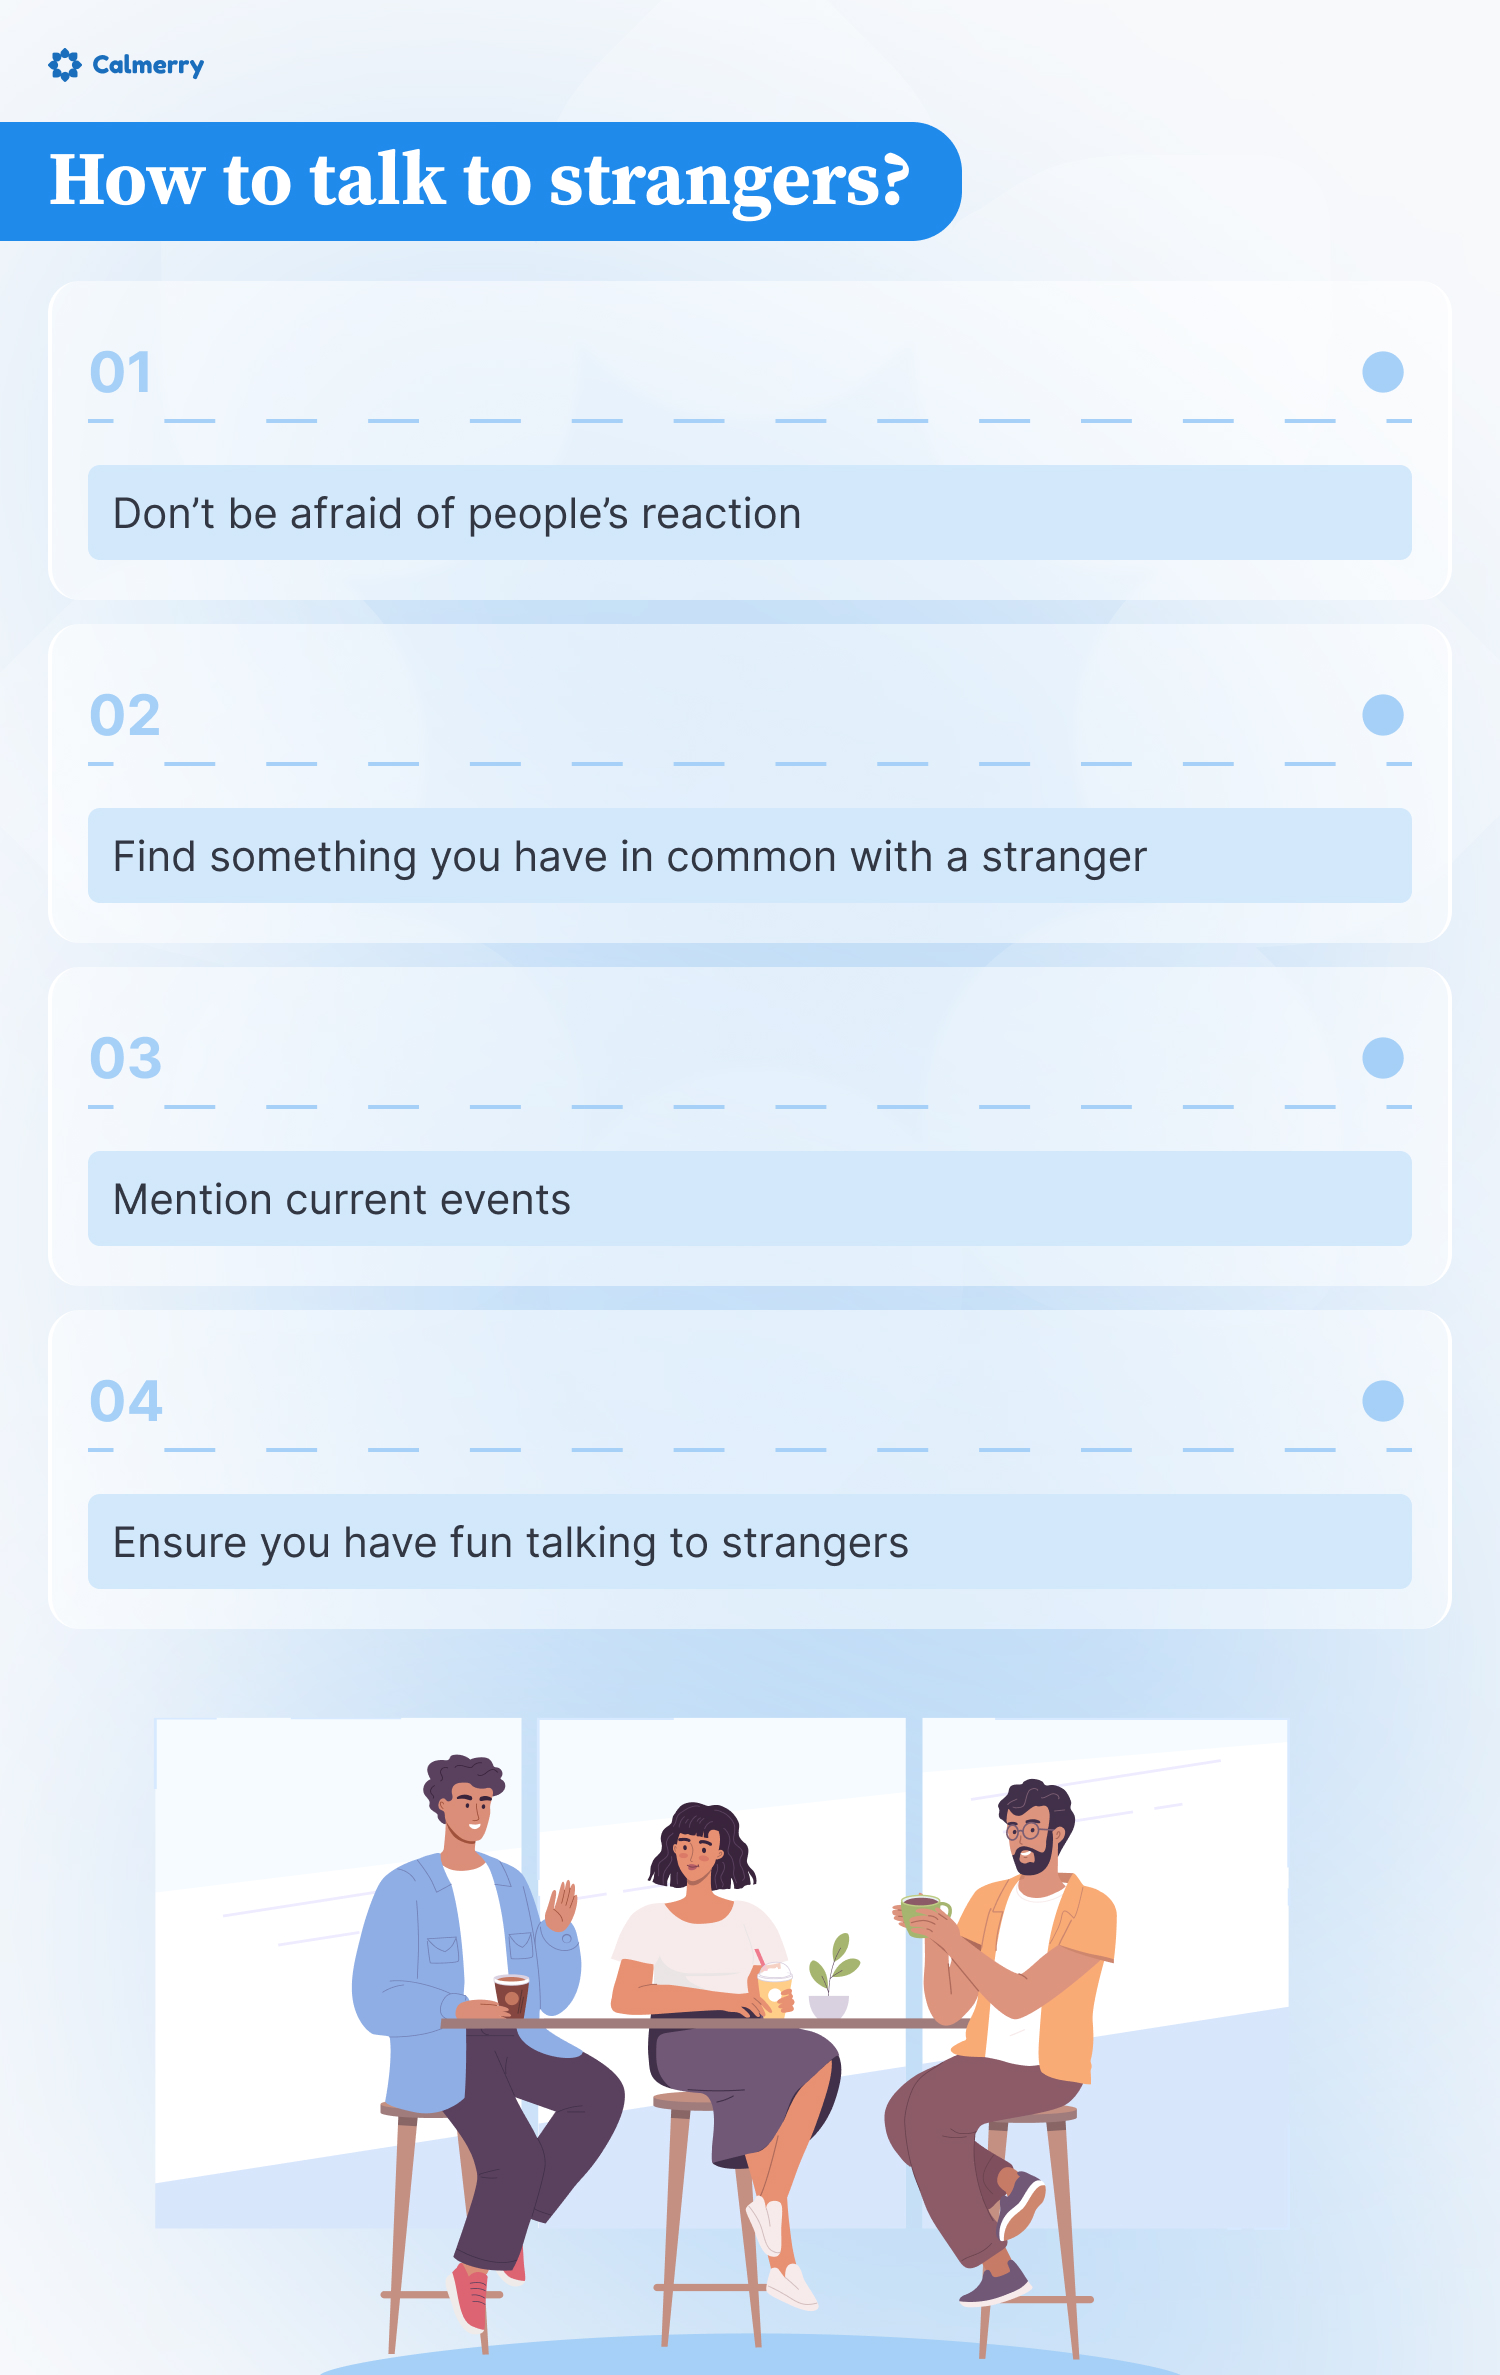 This image is an infographic titled "How to talk to strangers?" from Calmerry. It presents four tips for engaging with unfamiliar people:
Don't be afraid of people's reaction
Find something you have in common with a stranger
Mention current events
Ensure you have fun talking to strangers
Below these tips is an illustration of three diverse individuals sitting at a high table, engaged in conversation. They appear relaxed and sociable, exemplifying the advice given above.
The overall design uses a soothing blue color scheme and clean, modern graphics. This infographic aims to provide practical advice for overcoming social anxiety and fostering connections with new people in a friendly, approachable manner.